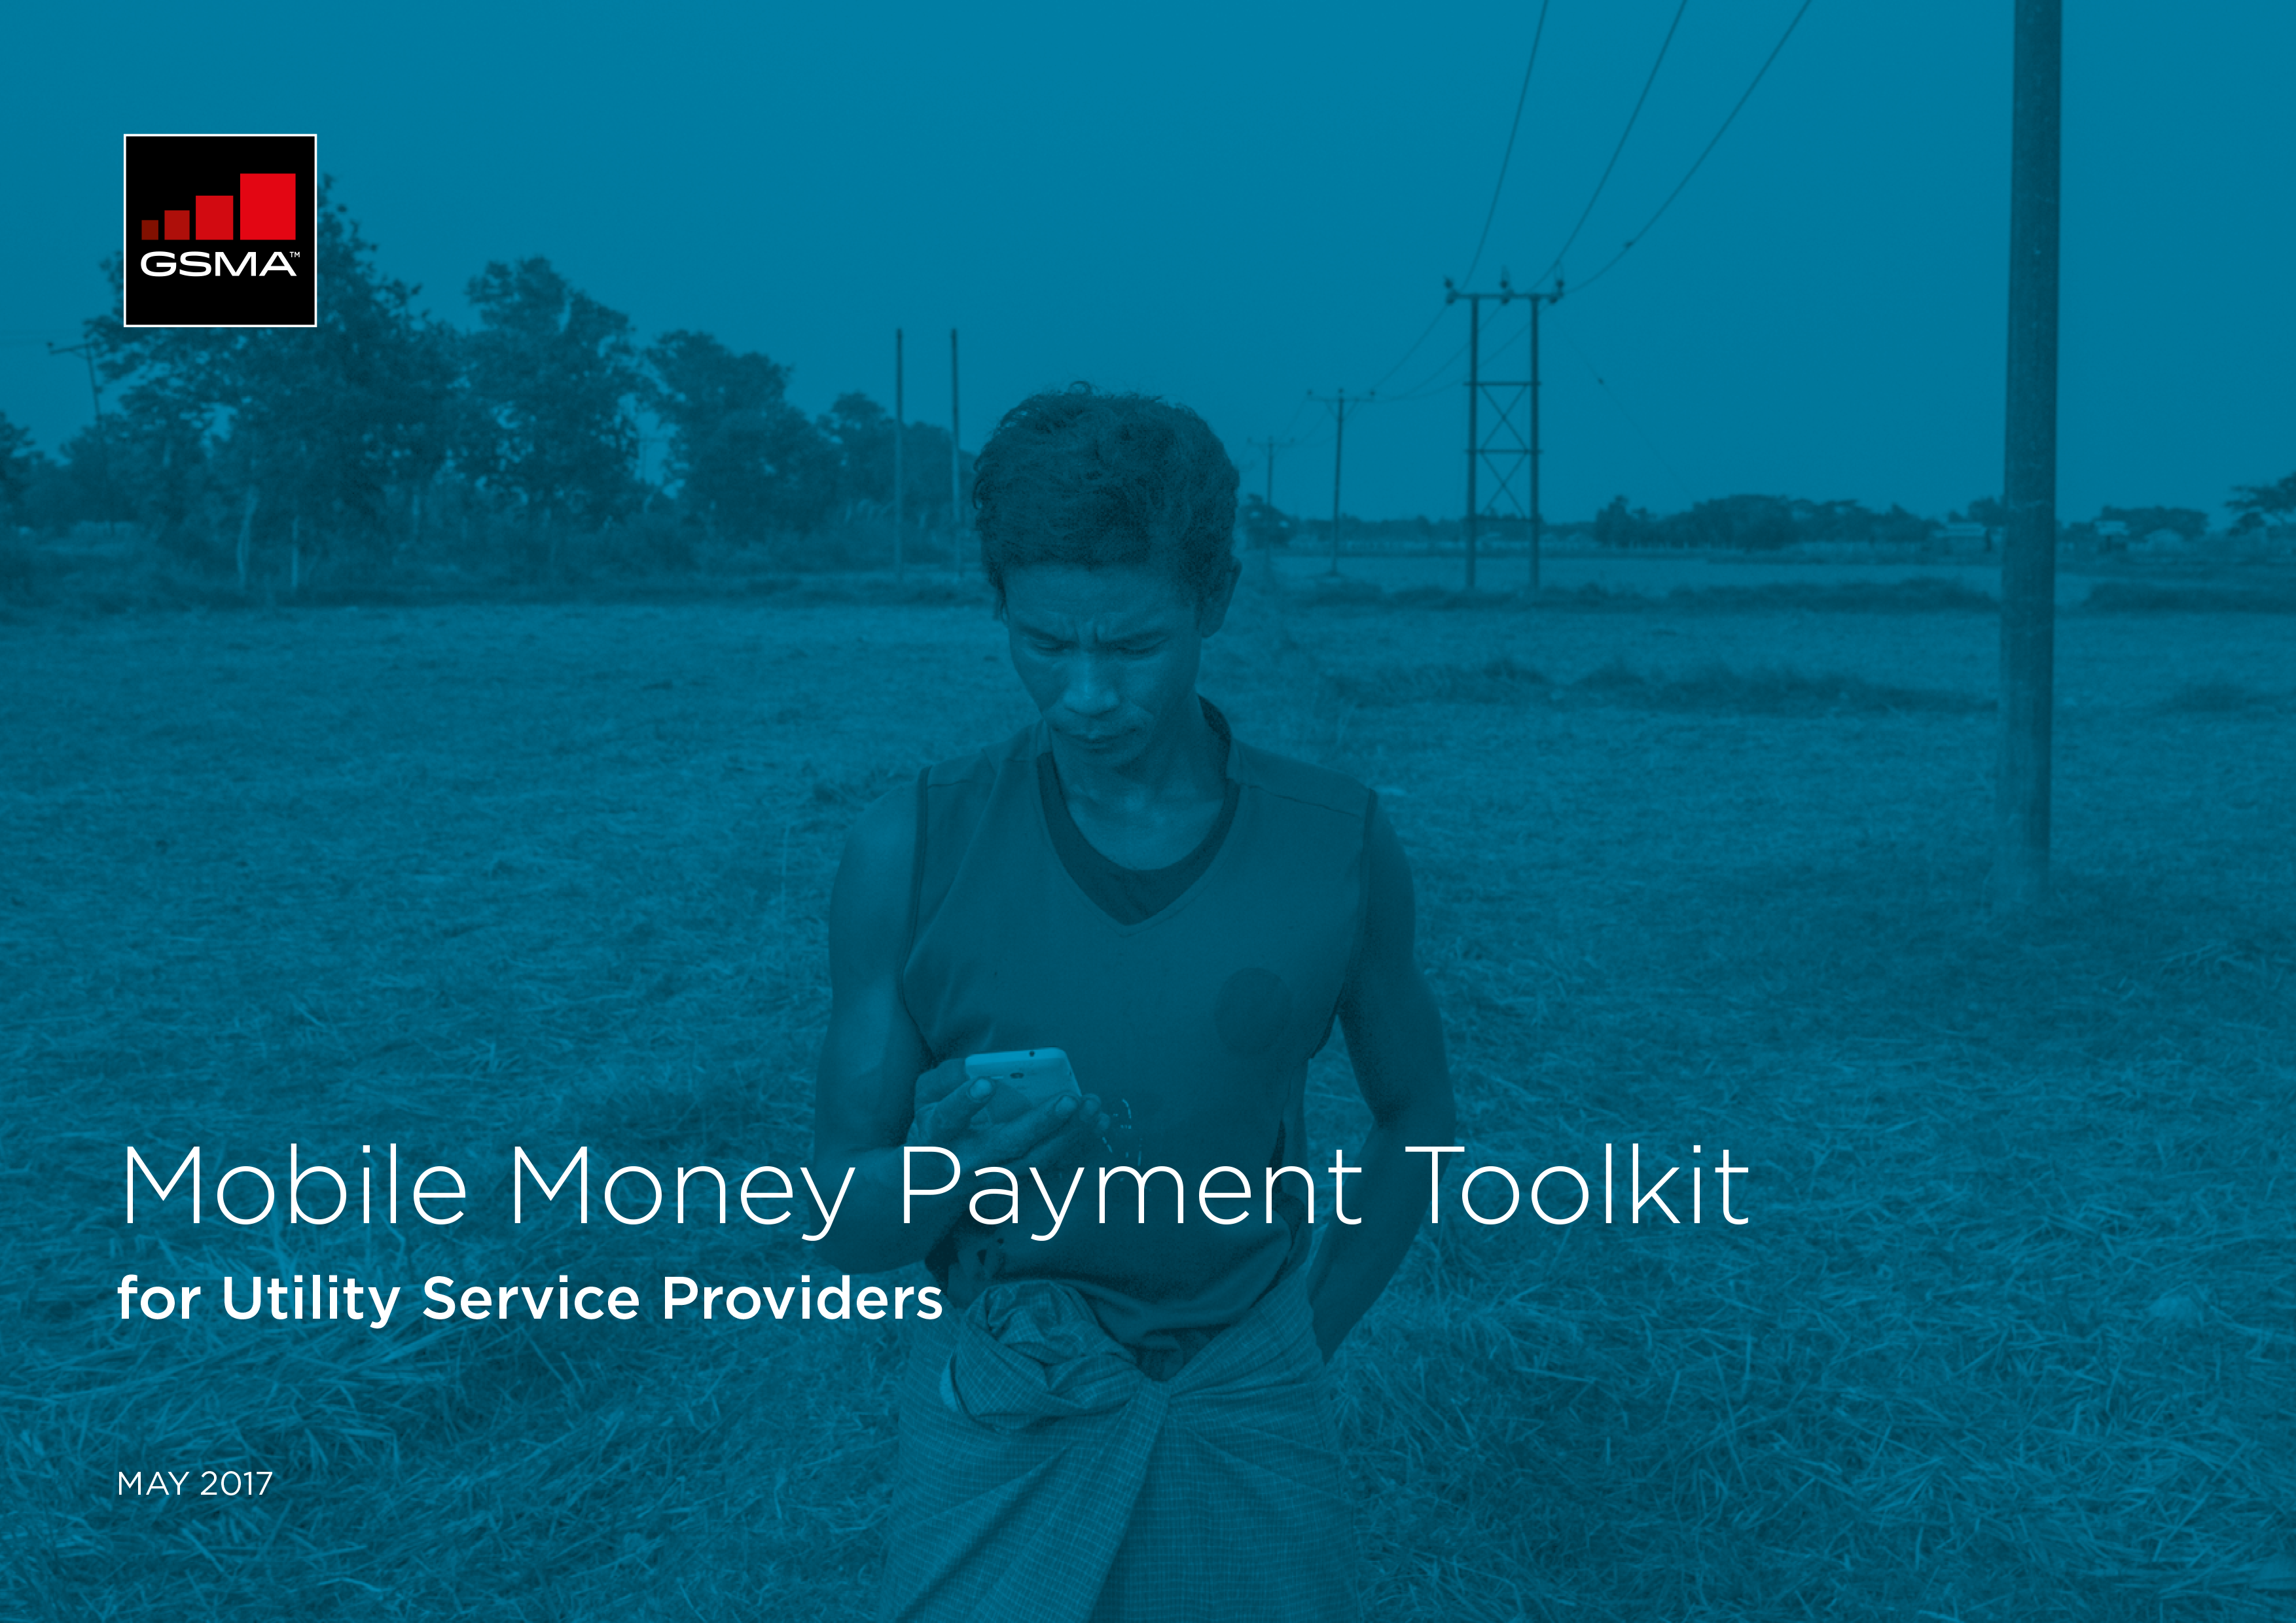 Mobile Money Payment Toolkit for Utility Service Providers image